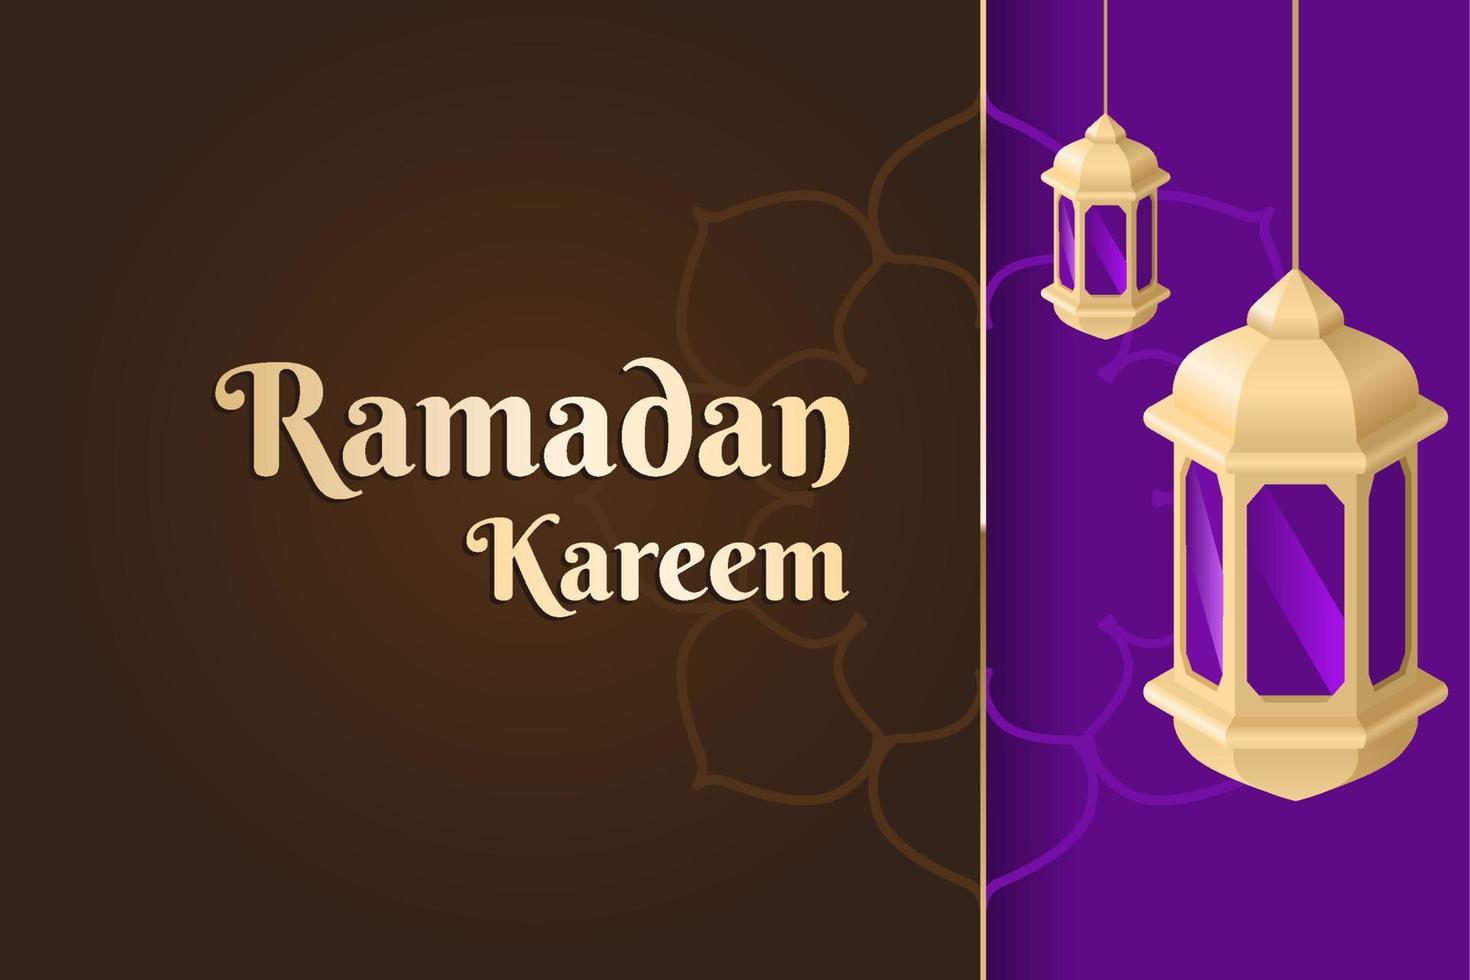 Ramadhan kareem banner design. with golden laterns. brown and purple background. suitable for banner, greeting card, and poster vector